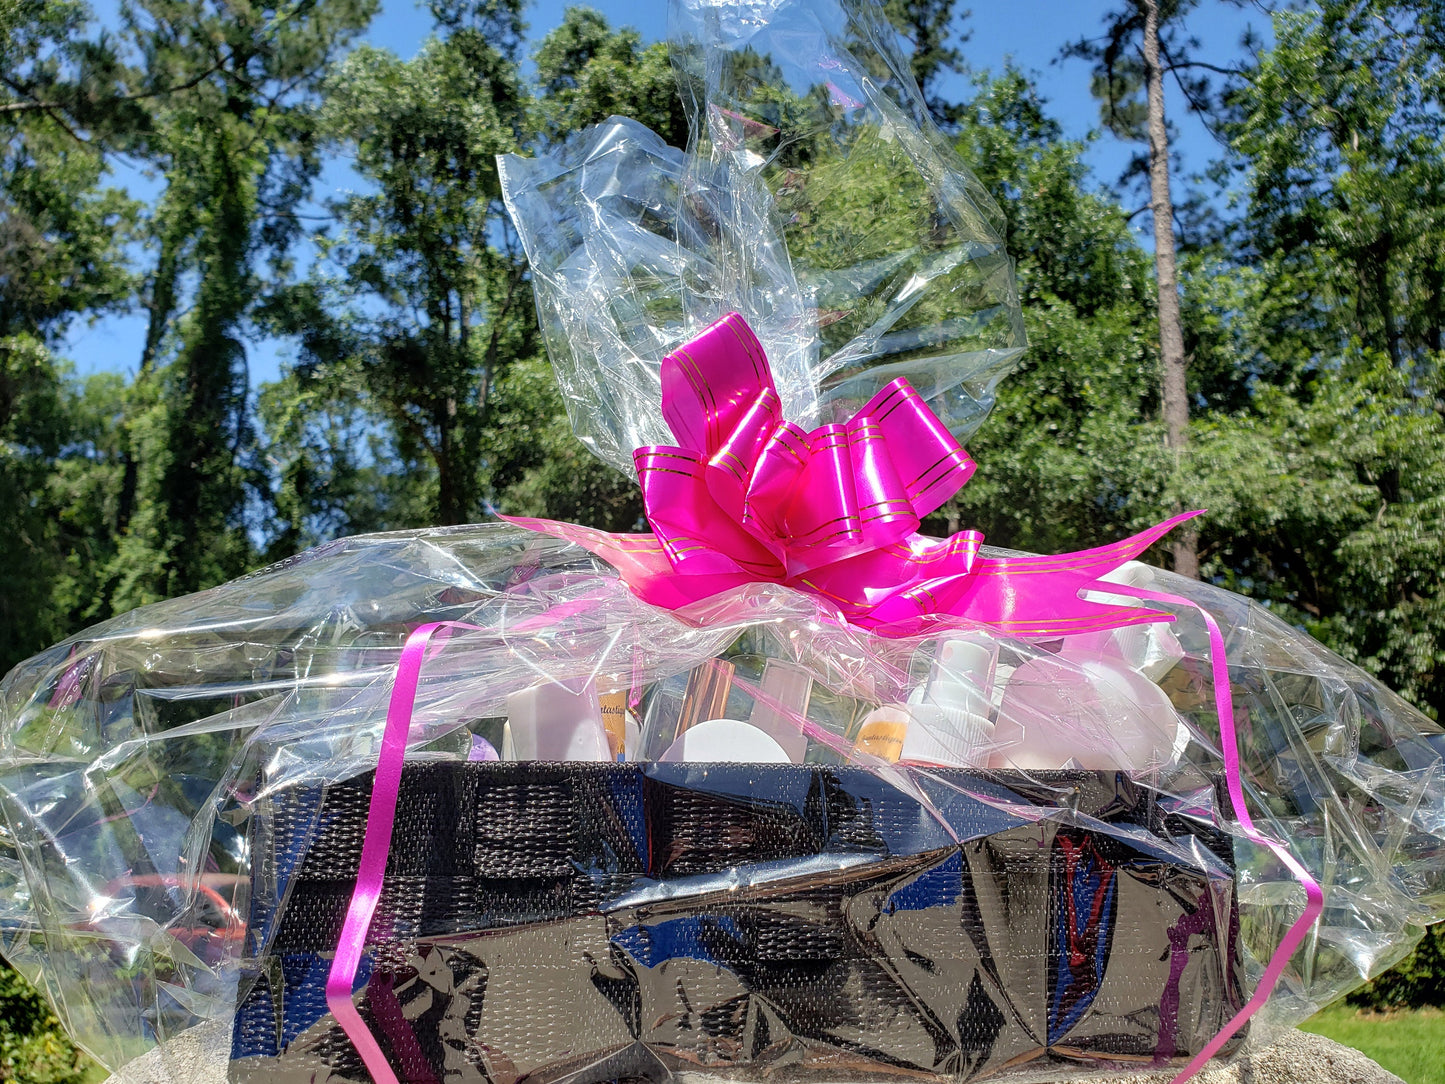 Spa Gift Set, Spa Kit, Spa Gift Basket, Spa basket, bath gift set, bath bomb, Gift basket, Mothers day gift from daughter gift, gift for mom